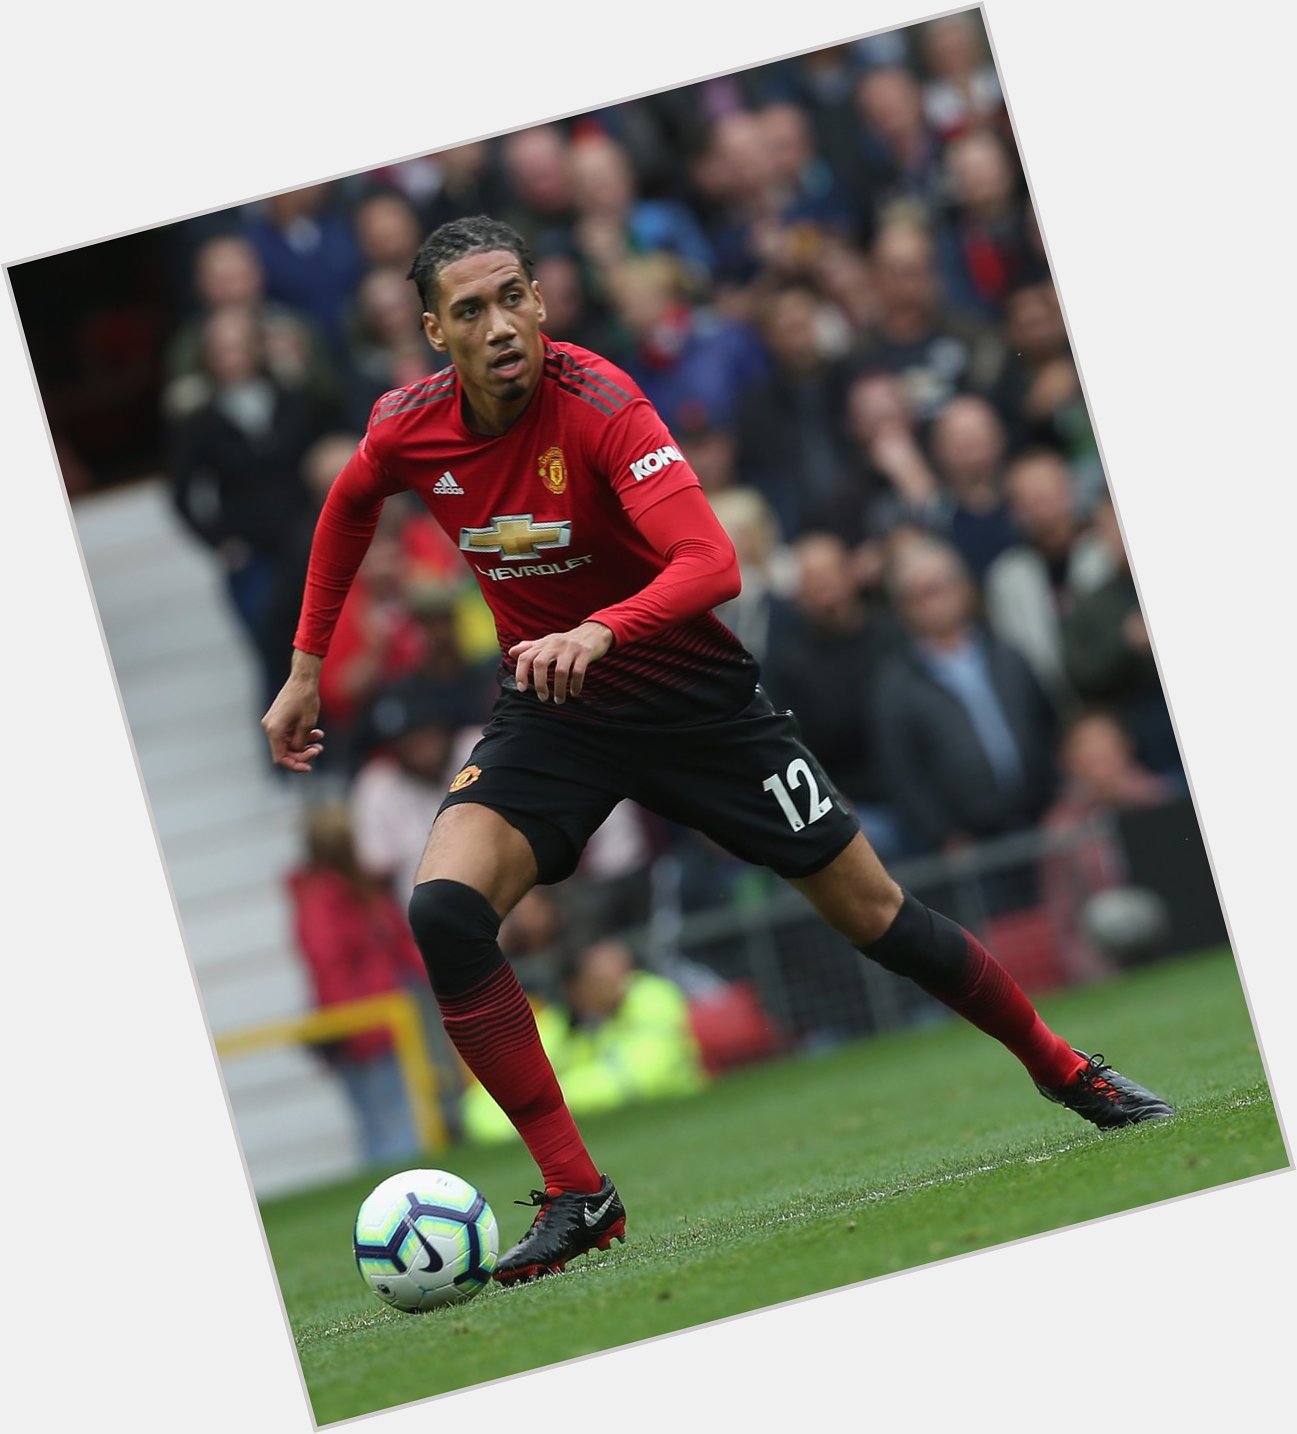 Happy birthday to Chris Smalling. The Manchester United defender turns 29 today.  